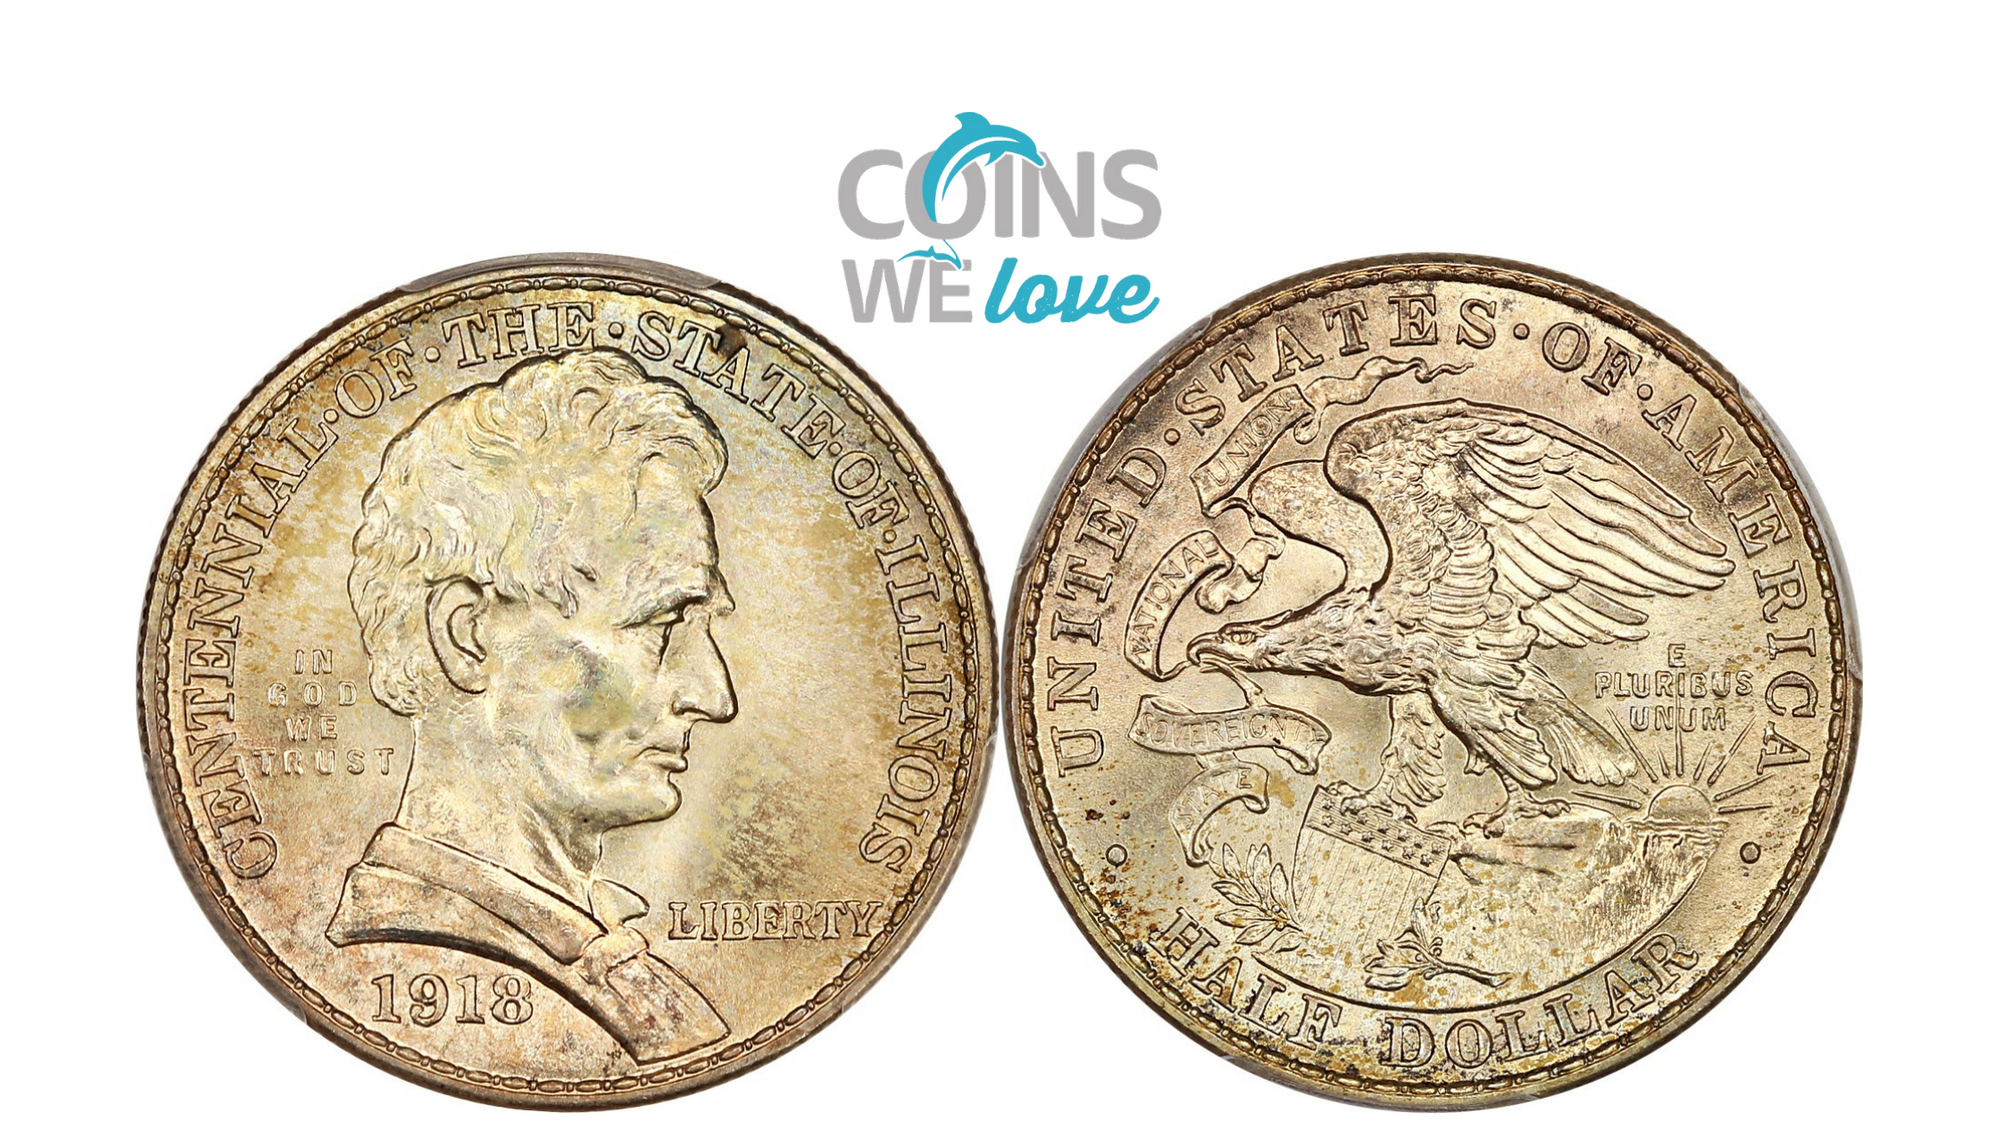 Coins We Love: Laundry Week at DLRC